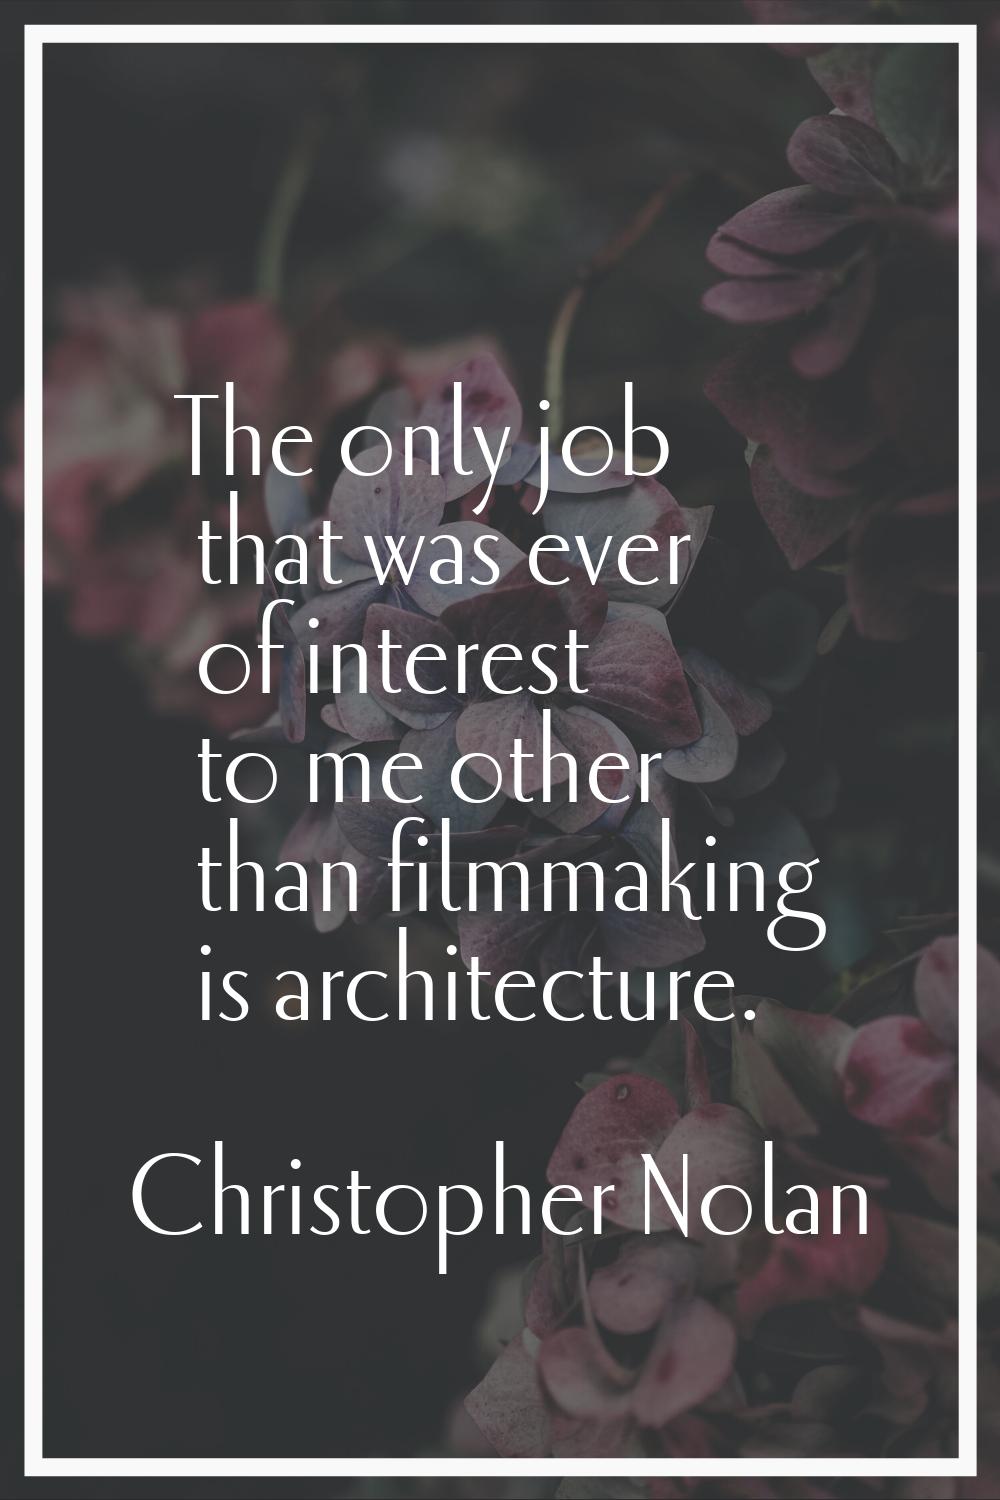 The only job that was ever of interest to me other than filmmaking is architecture.